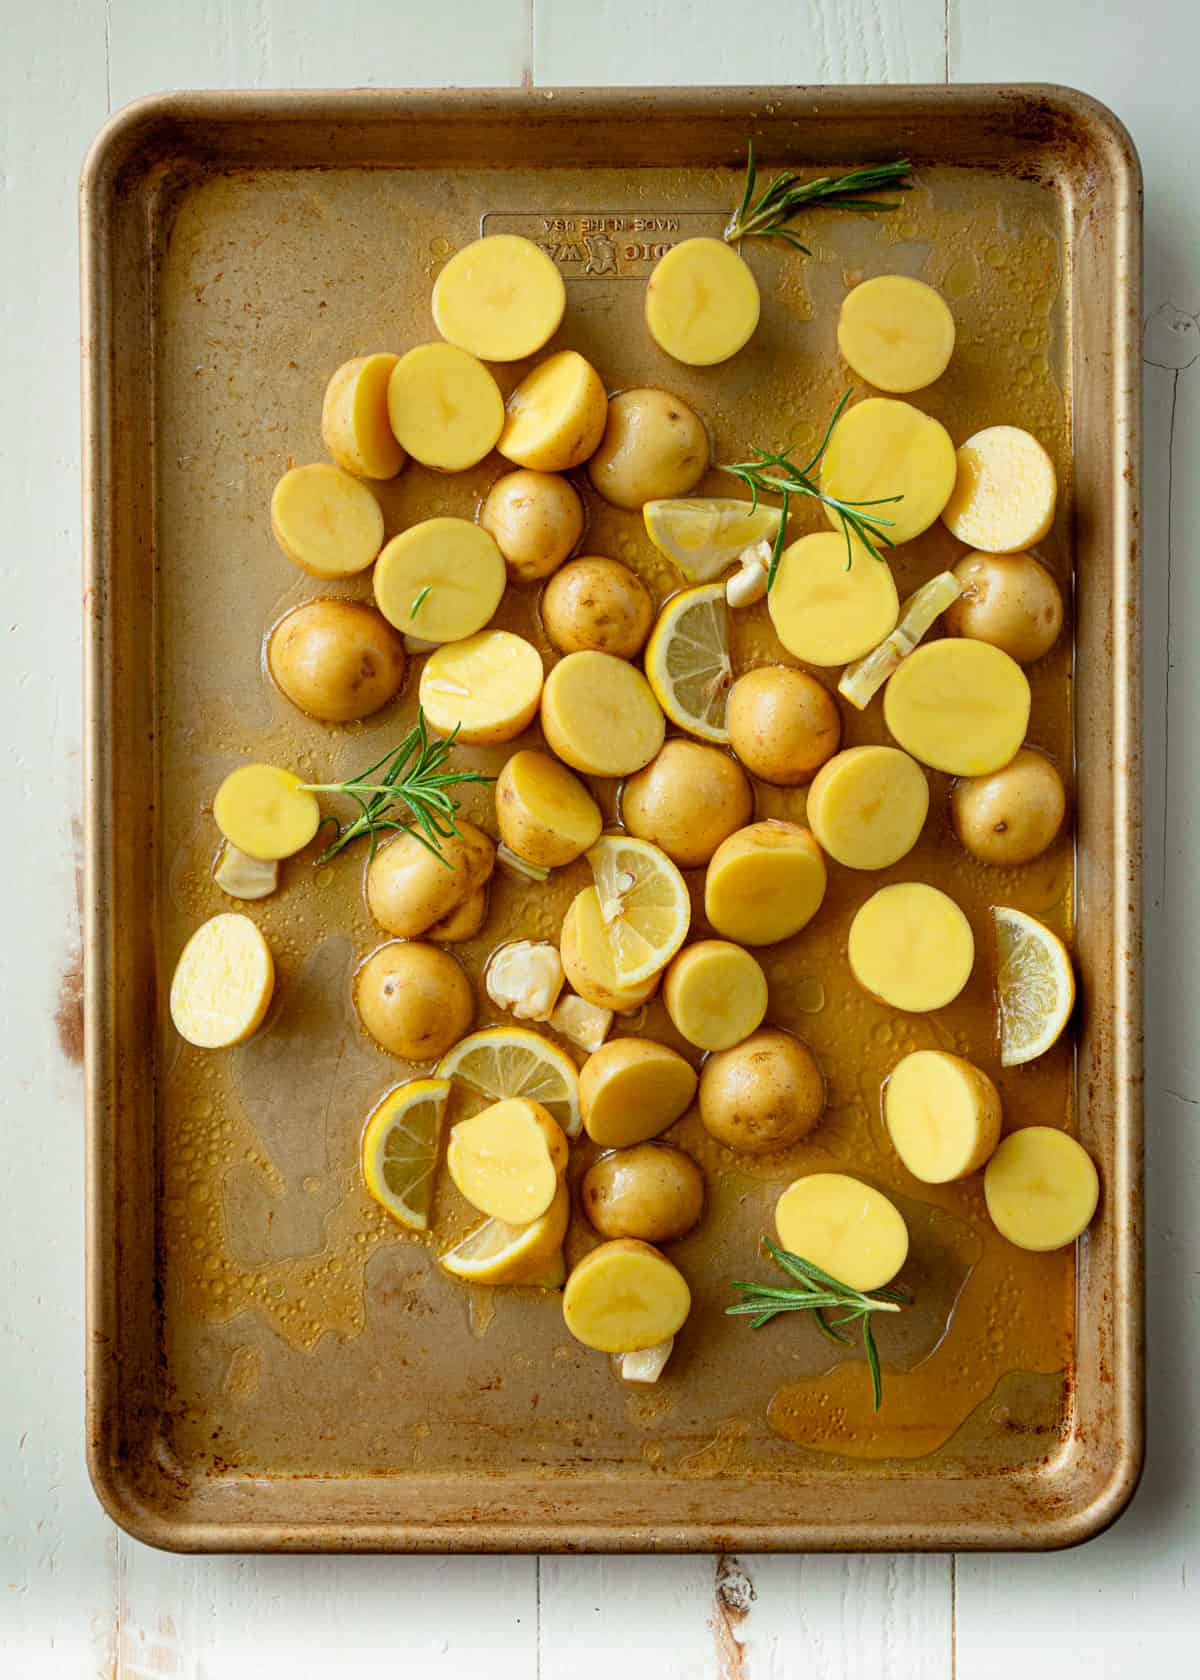 uncooked potatoes and lemon slices on a sheet pan